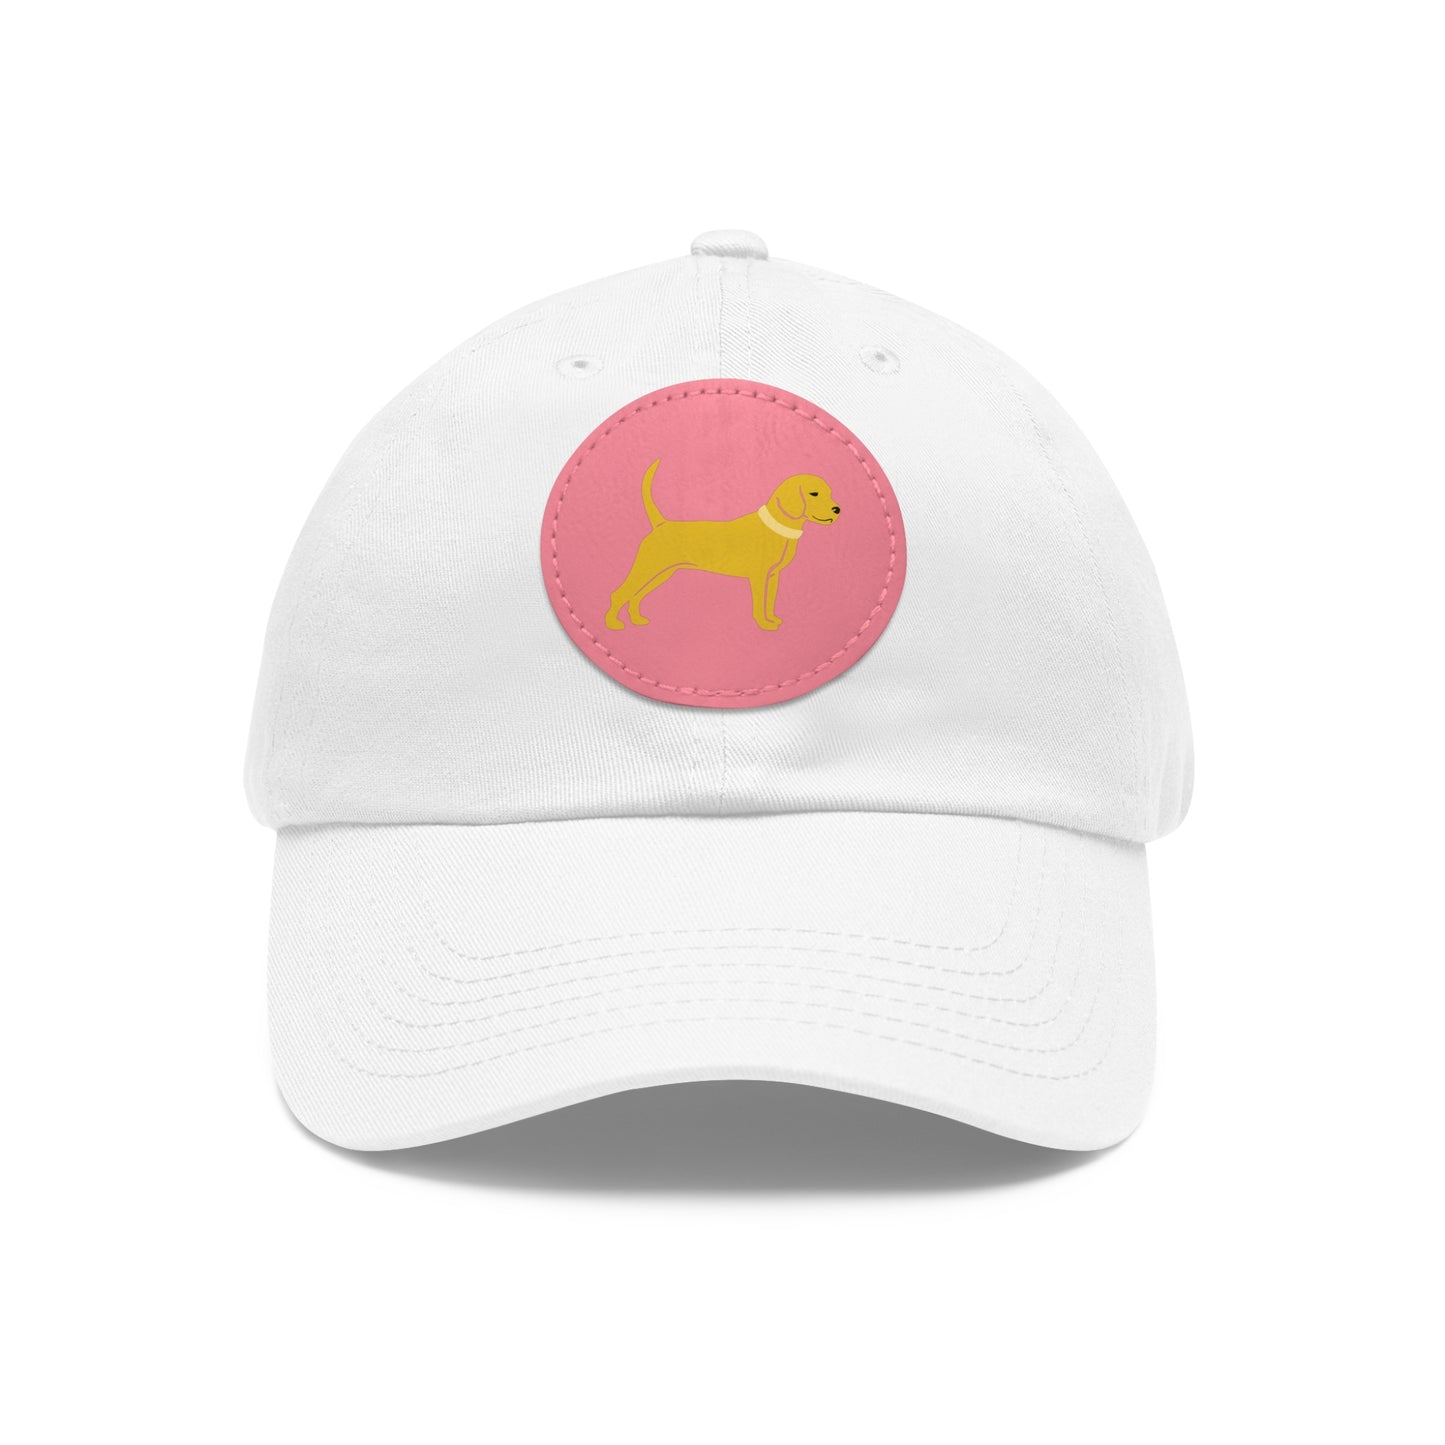 Unleashed Life Little Yellow Dog Dad Hat with Leather Patch